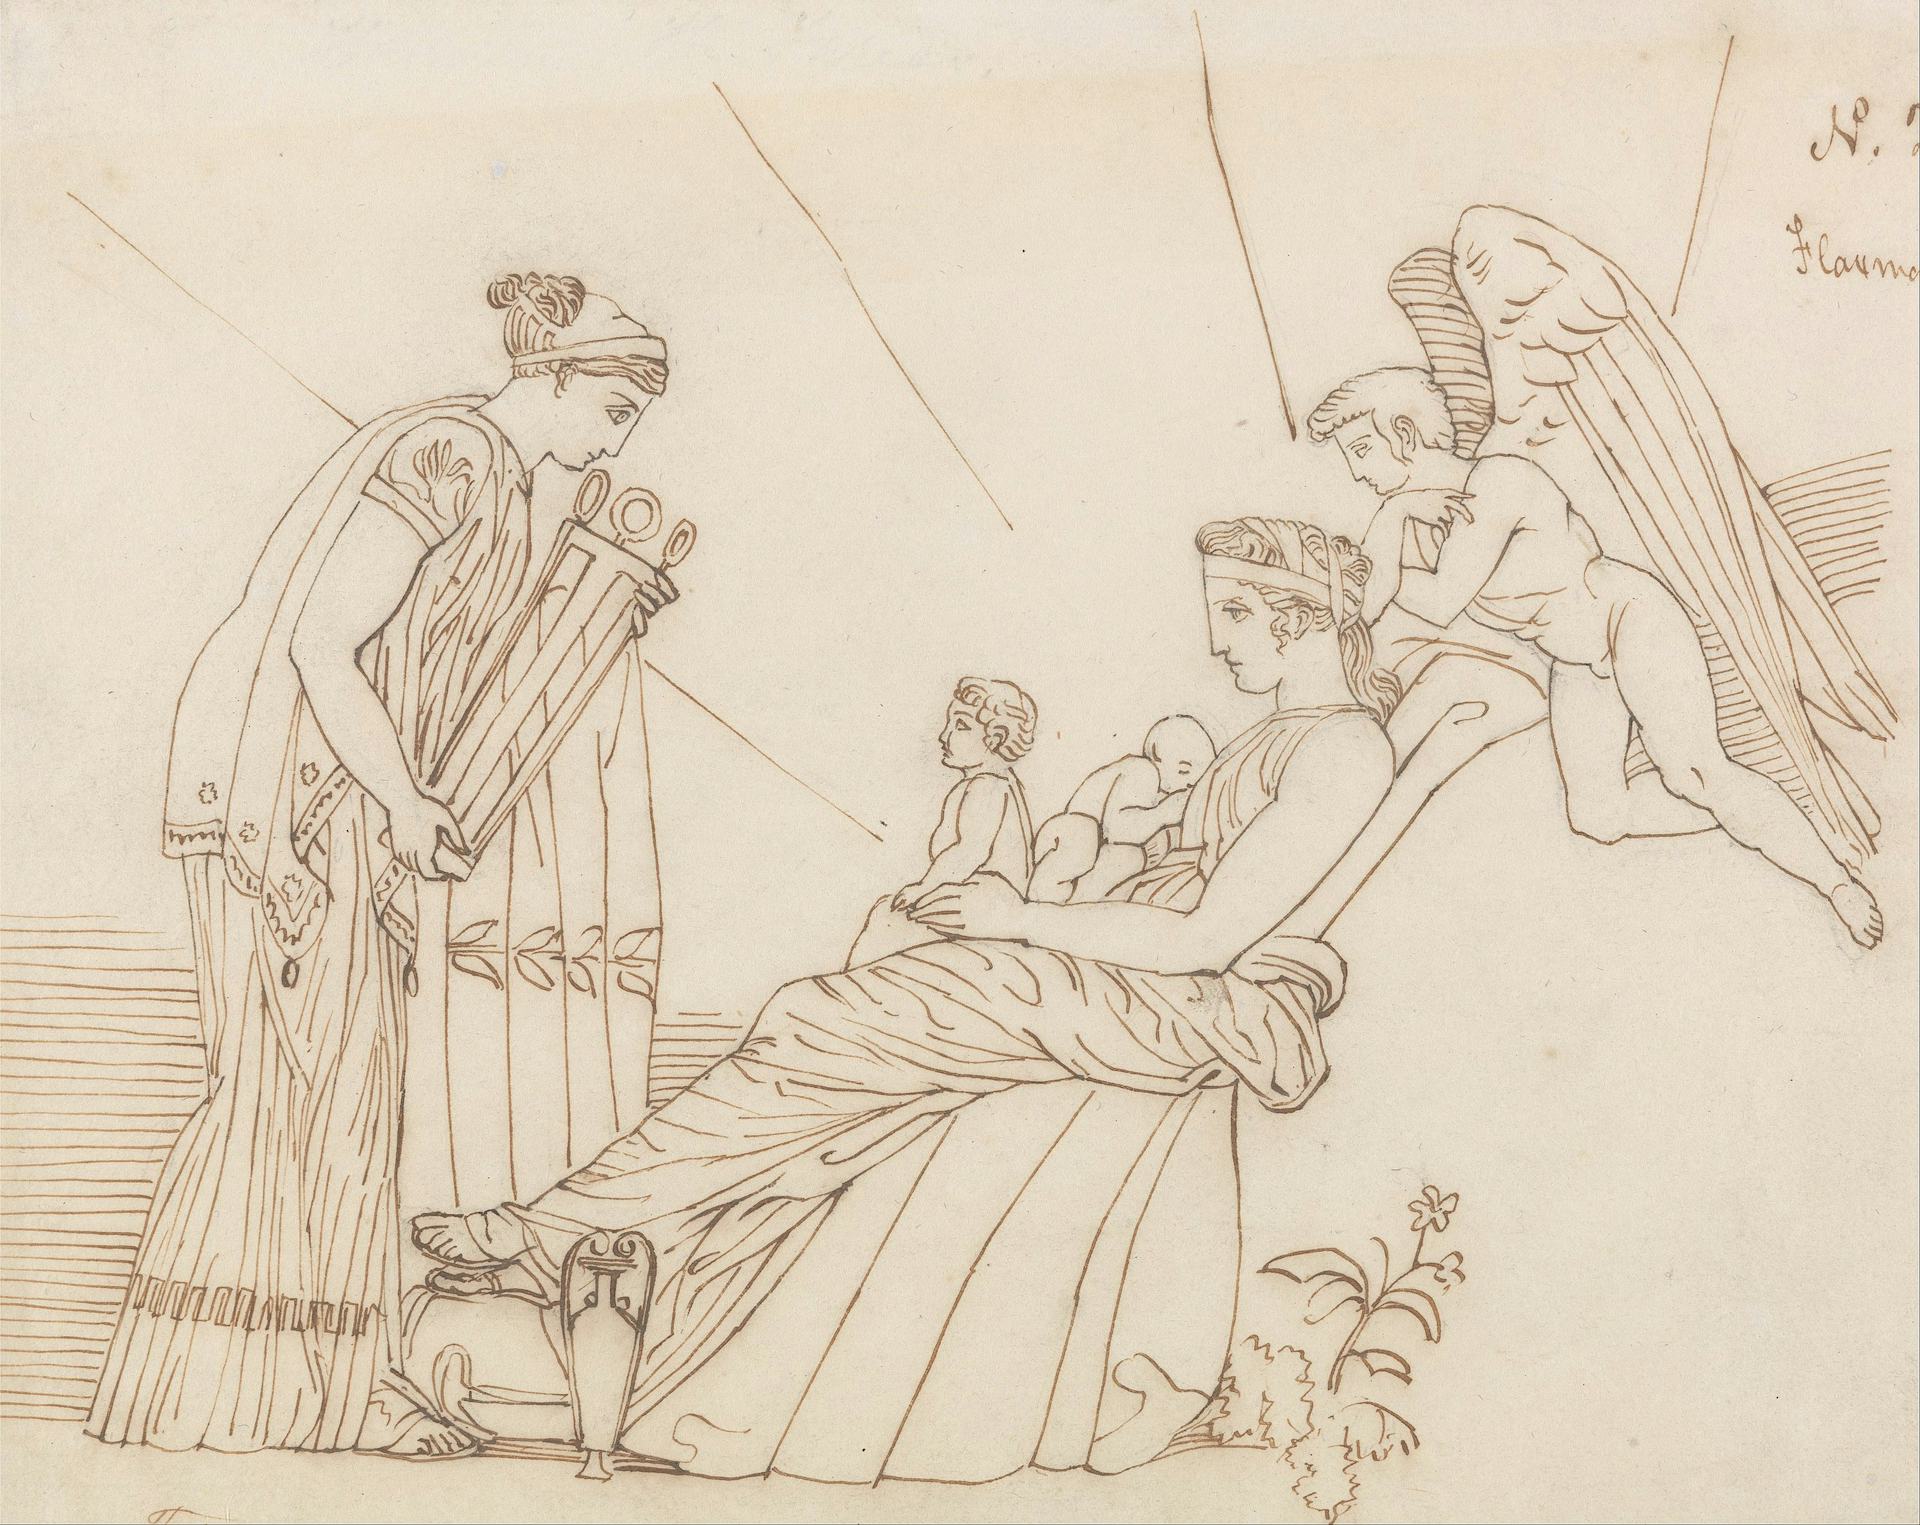 To Phoebus at His Birth, From Aeschylus, Furies by John Flaxman (n.d.)